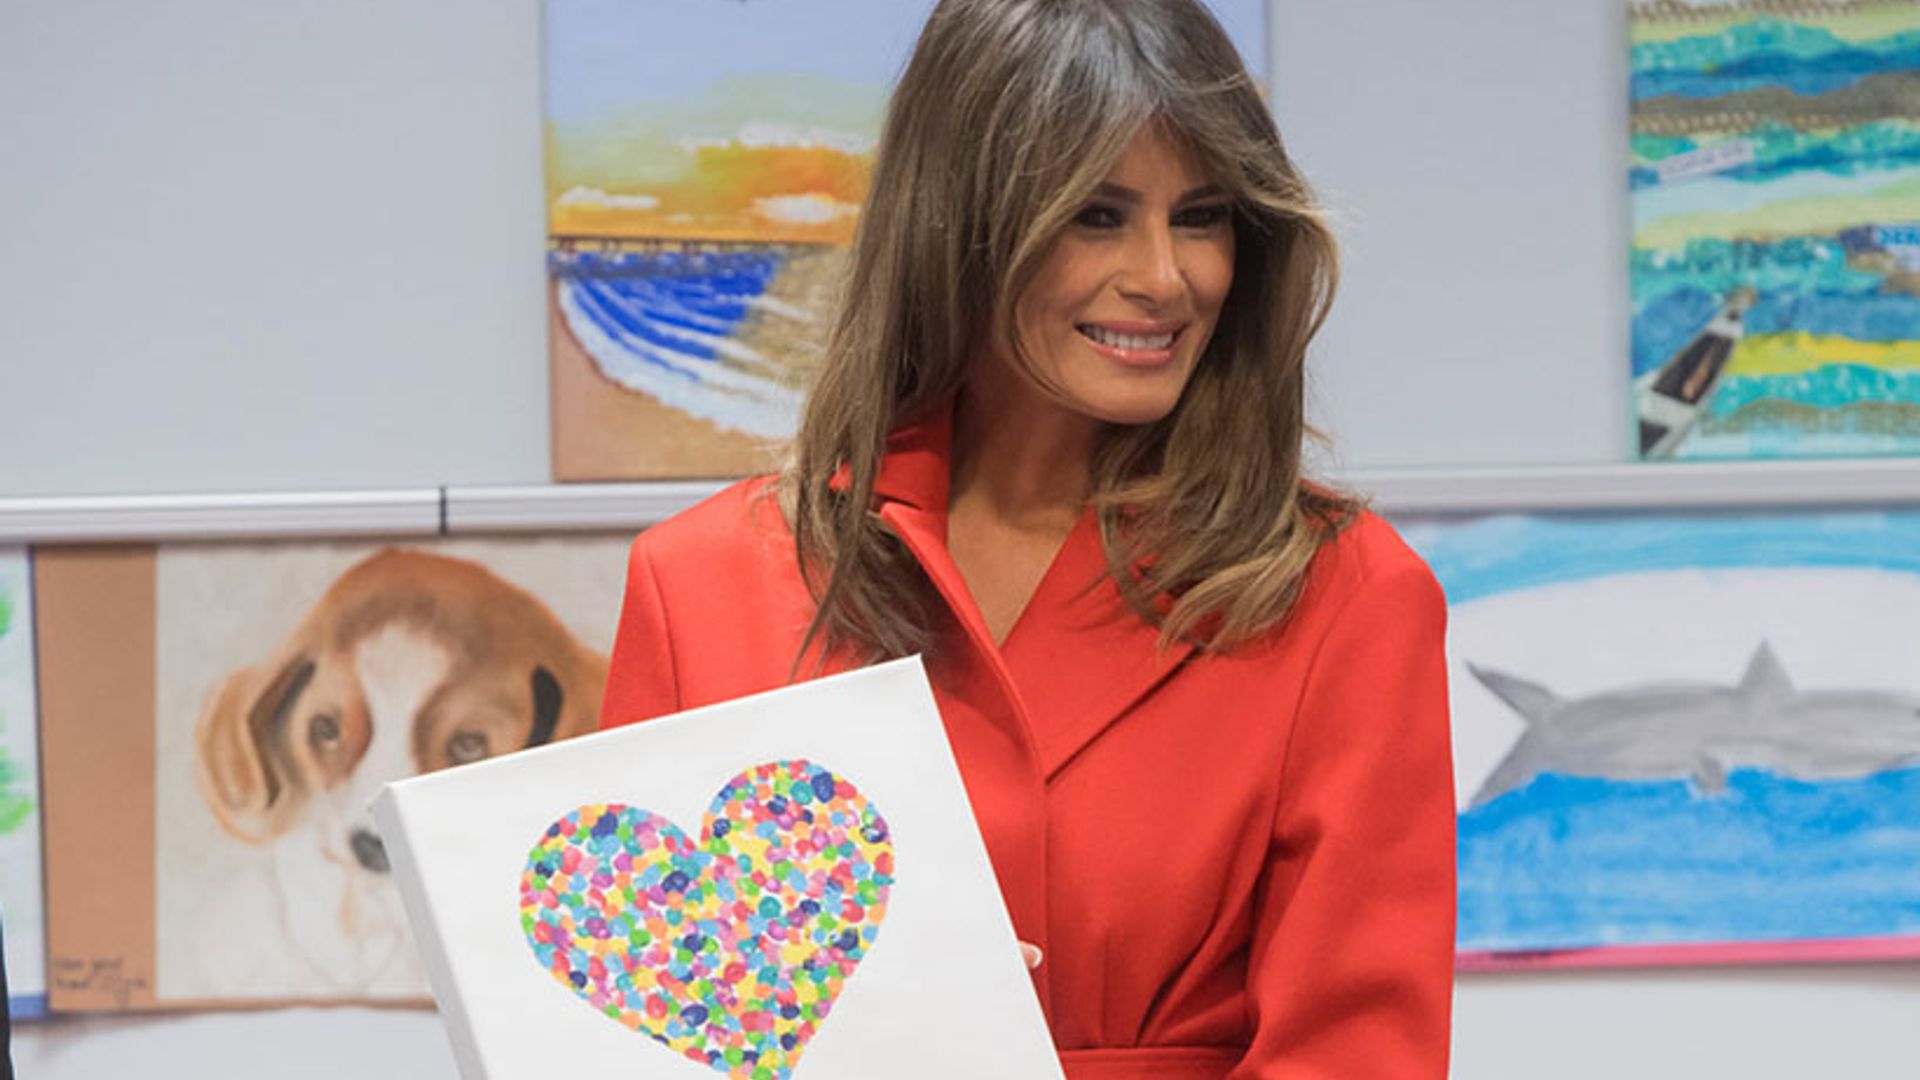 How Melania Trump spent her Valentine's Day away from D.C.